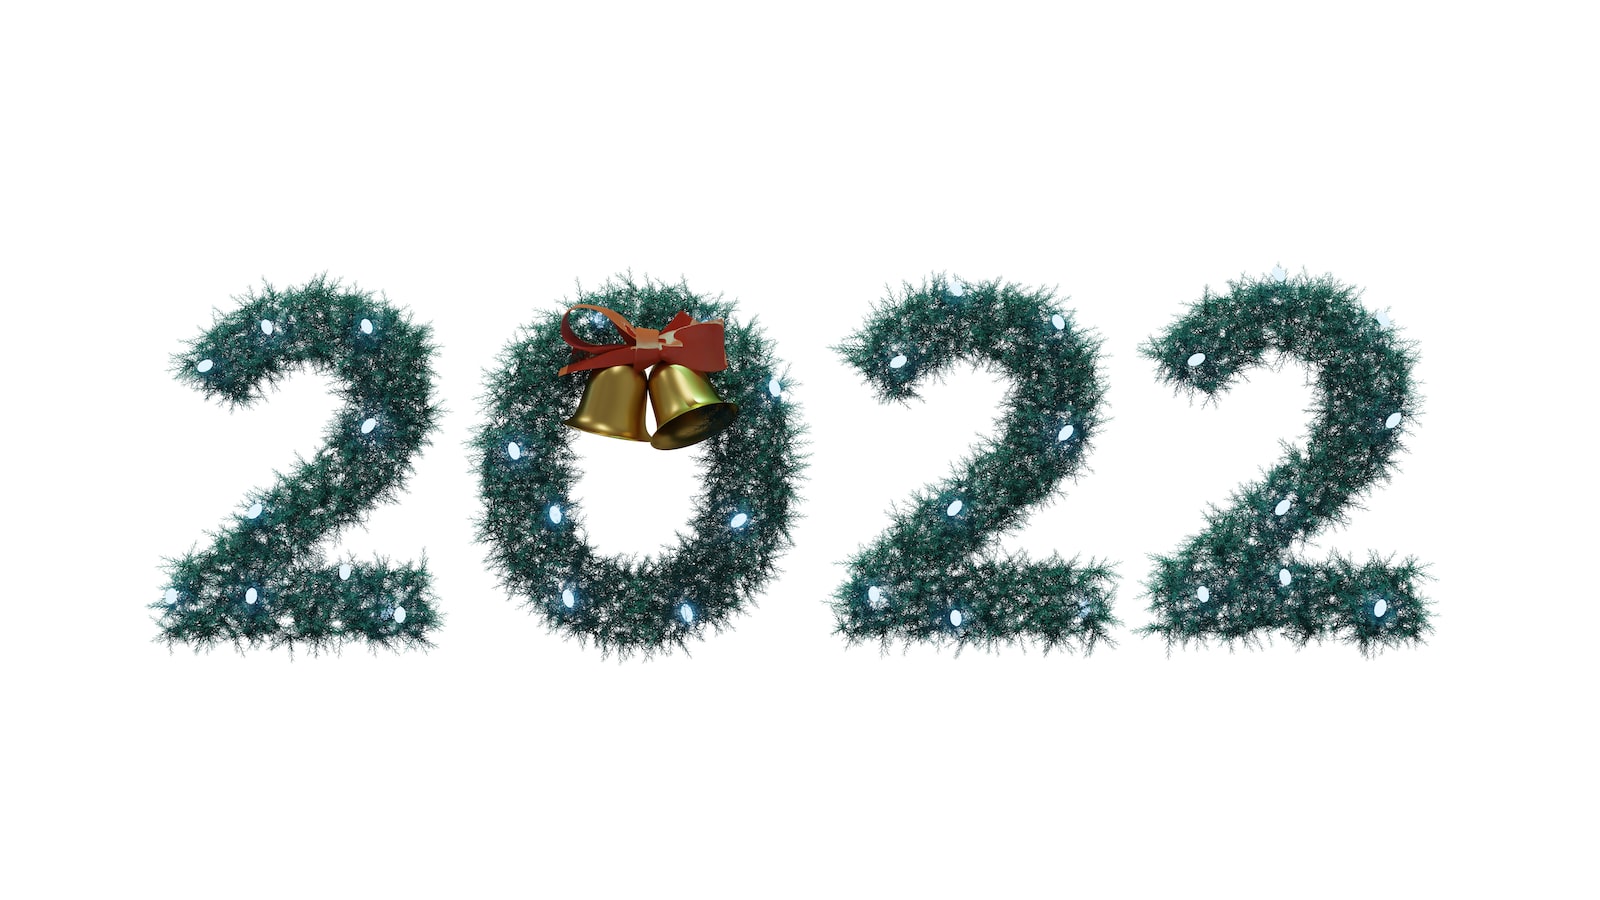 2022 is almost over, welcome 2023!